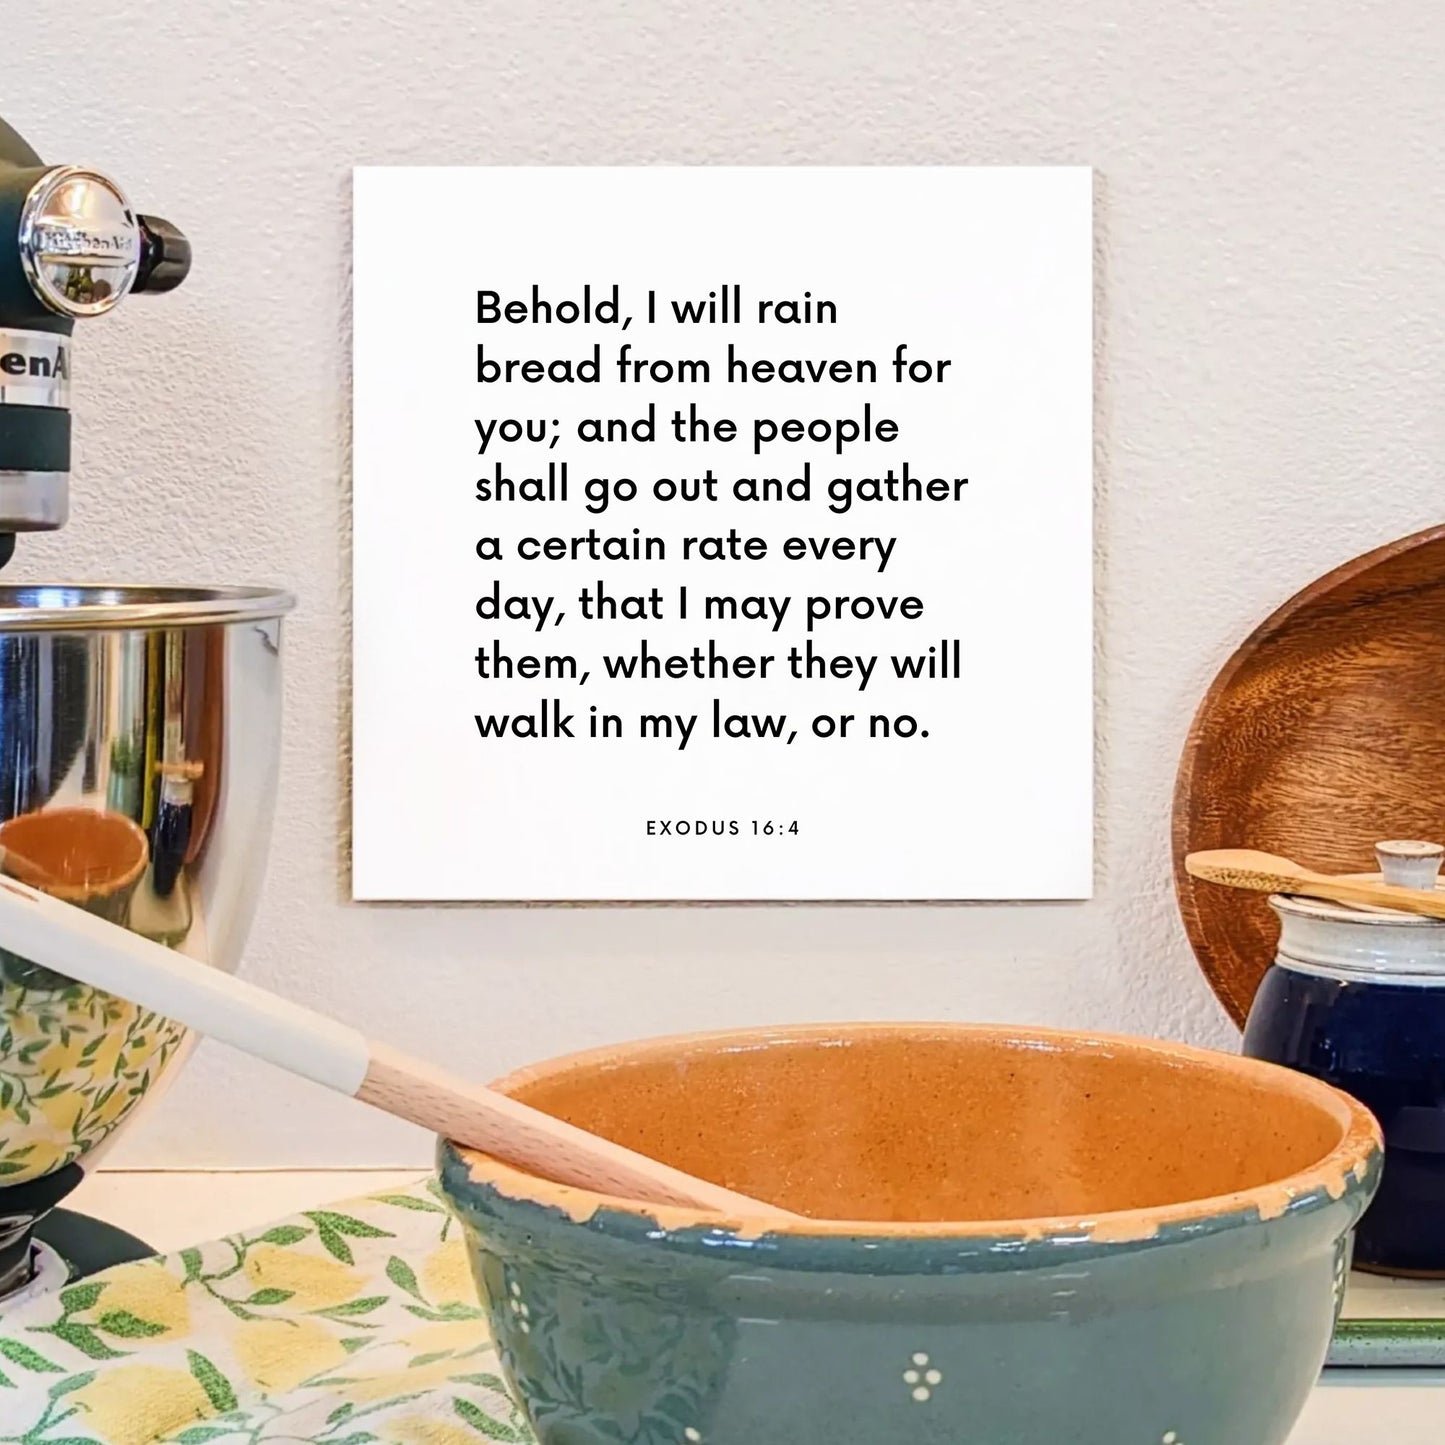 Kitchen mouting of the scripture tile for Exodus 16:4 - "That I may prove them, whether they will walk in my law"